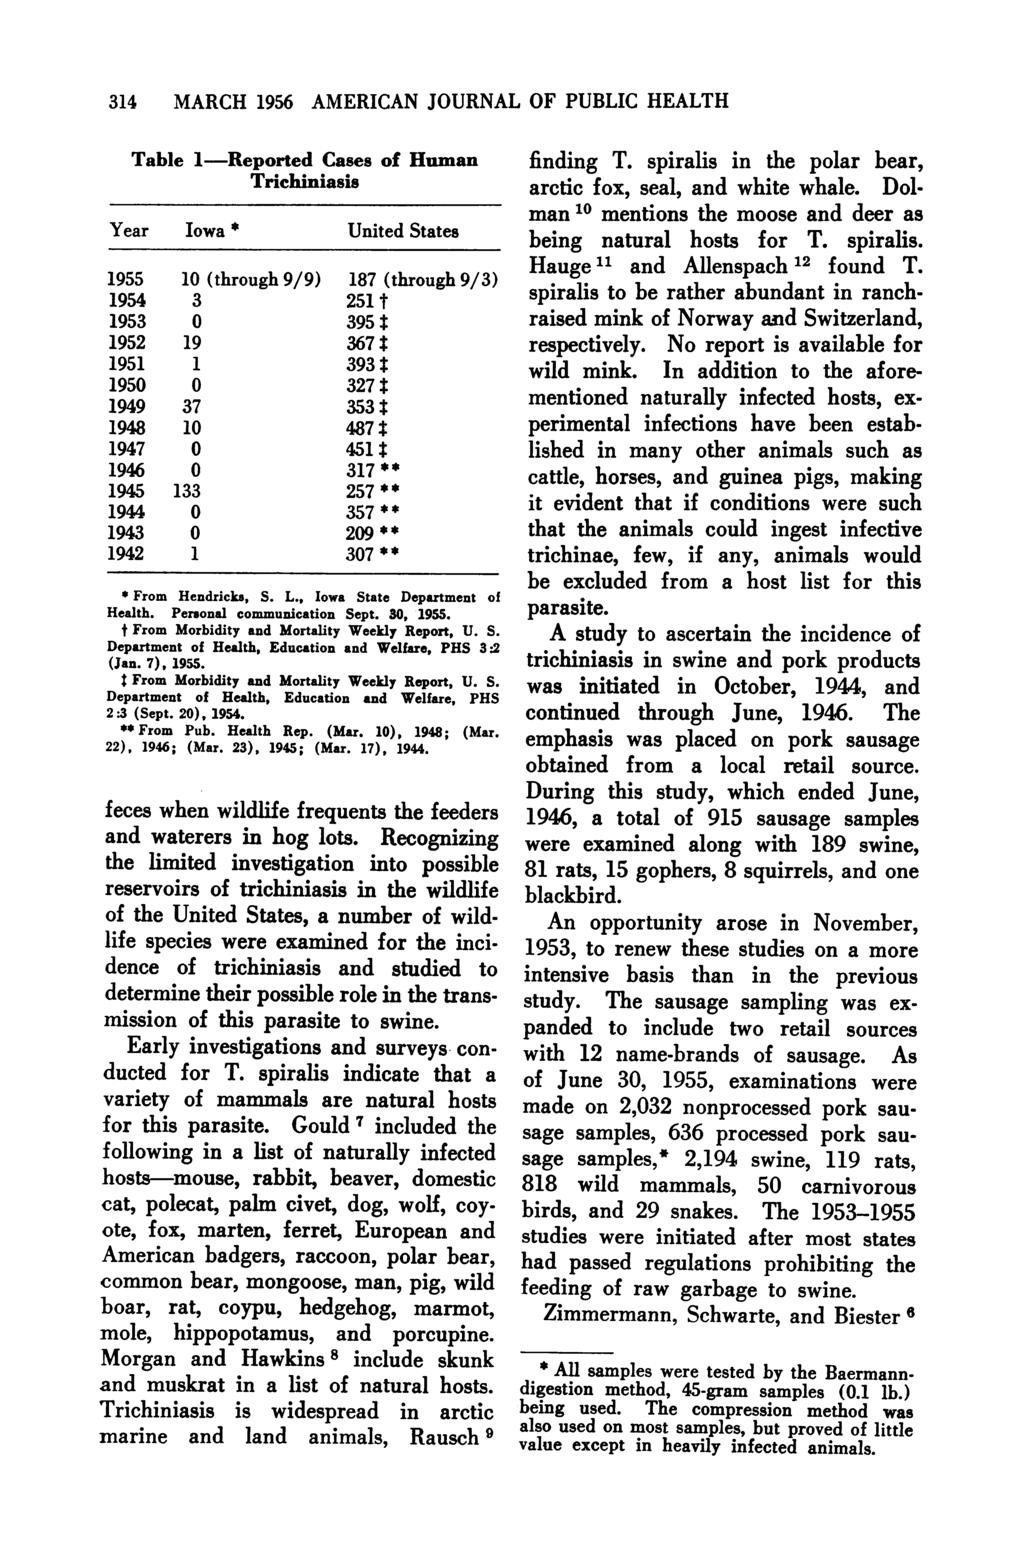 314 MARCH 1956 AMERICAN JOURNAL OF PUBLIC HEALTH Table 1-Reported Cases of Human Trichiniasis Year Iowa * United States 1955 10 (through 9/9) 187 (through 9/3) 1954 3 251 t 1953 0 395 i: 1952 19 367